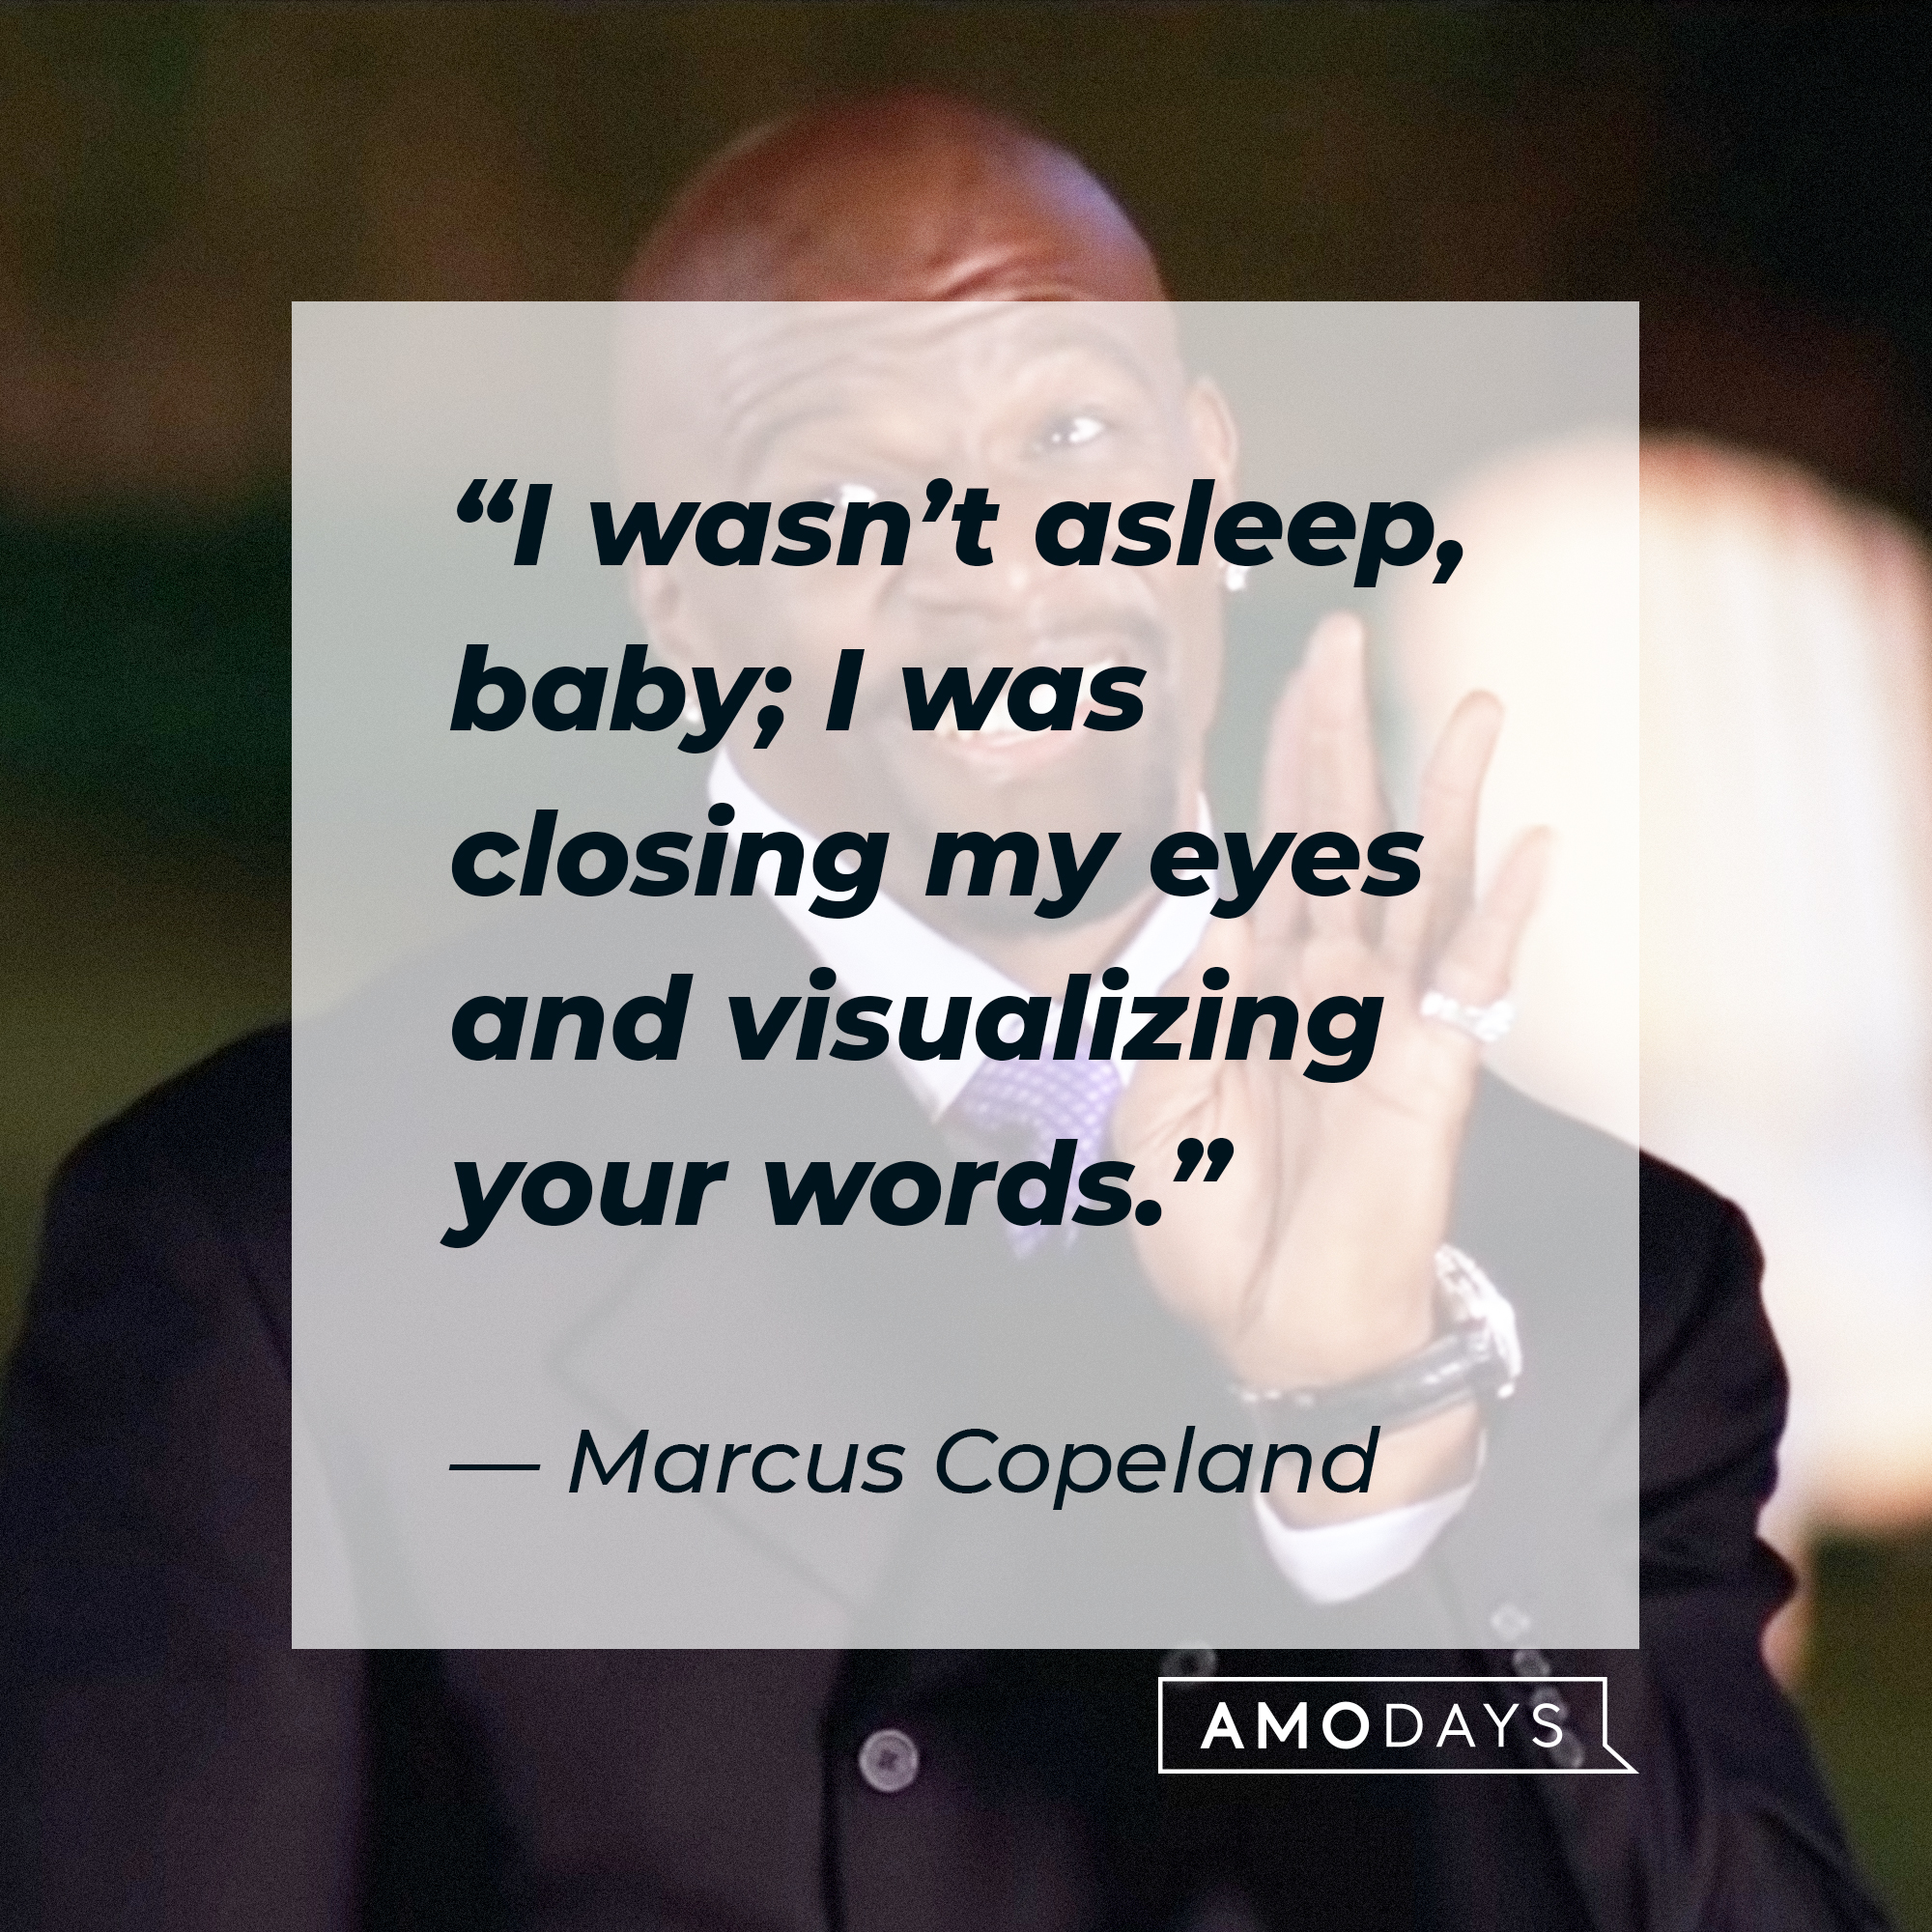 An image of Latrell Spencer with Marcus Copeland’s quote: “I wasn’t asleep, baby, I was closing my eyes and visualizing your words.” | Source: Sony Pictures Entertainment